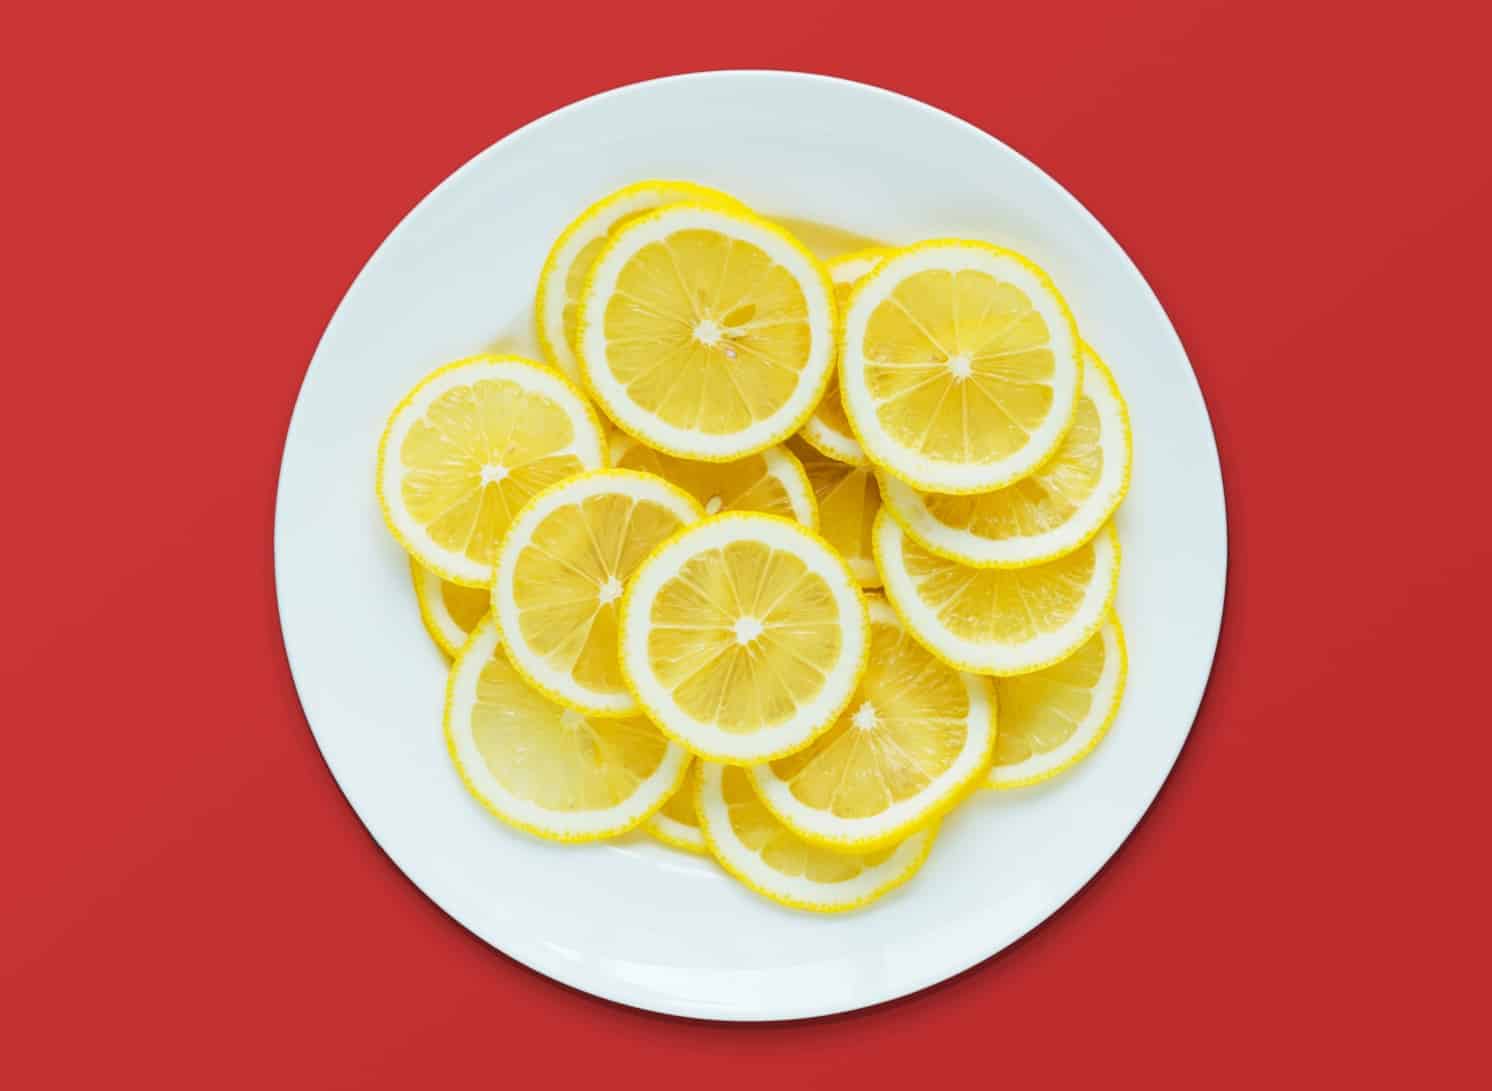 Lemon on a plate with red background